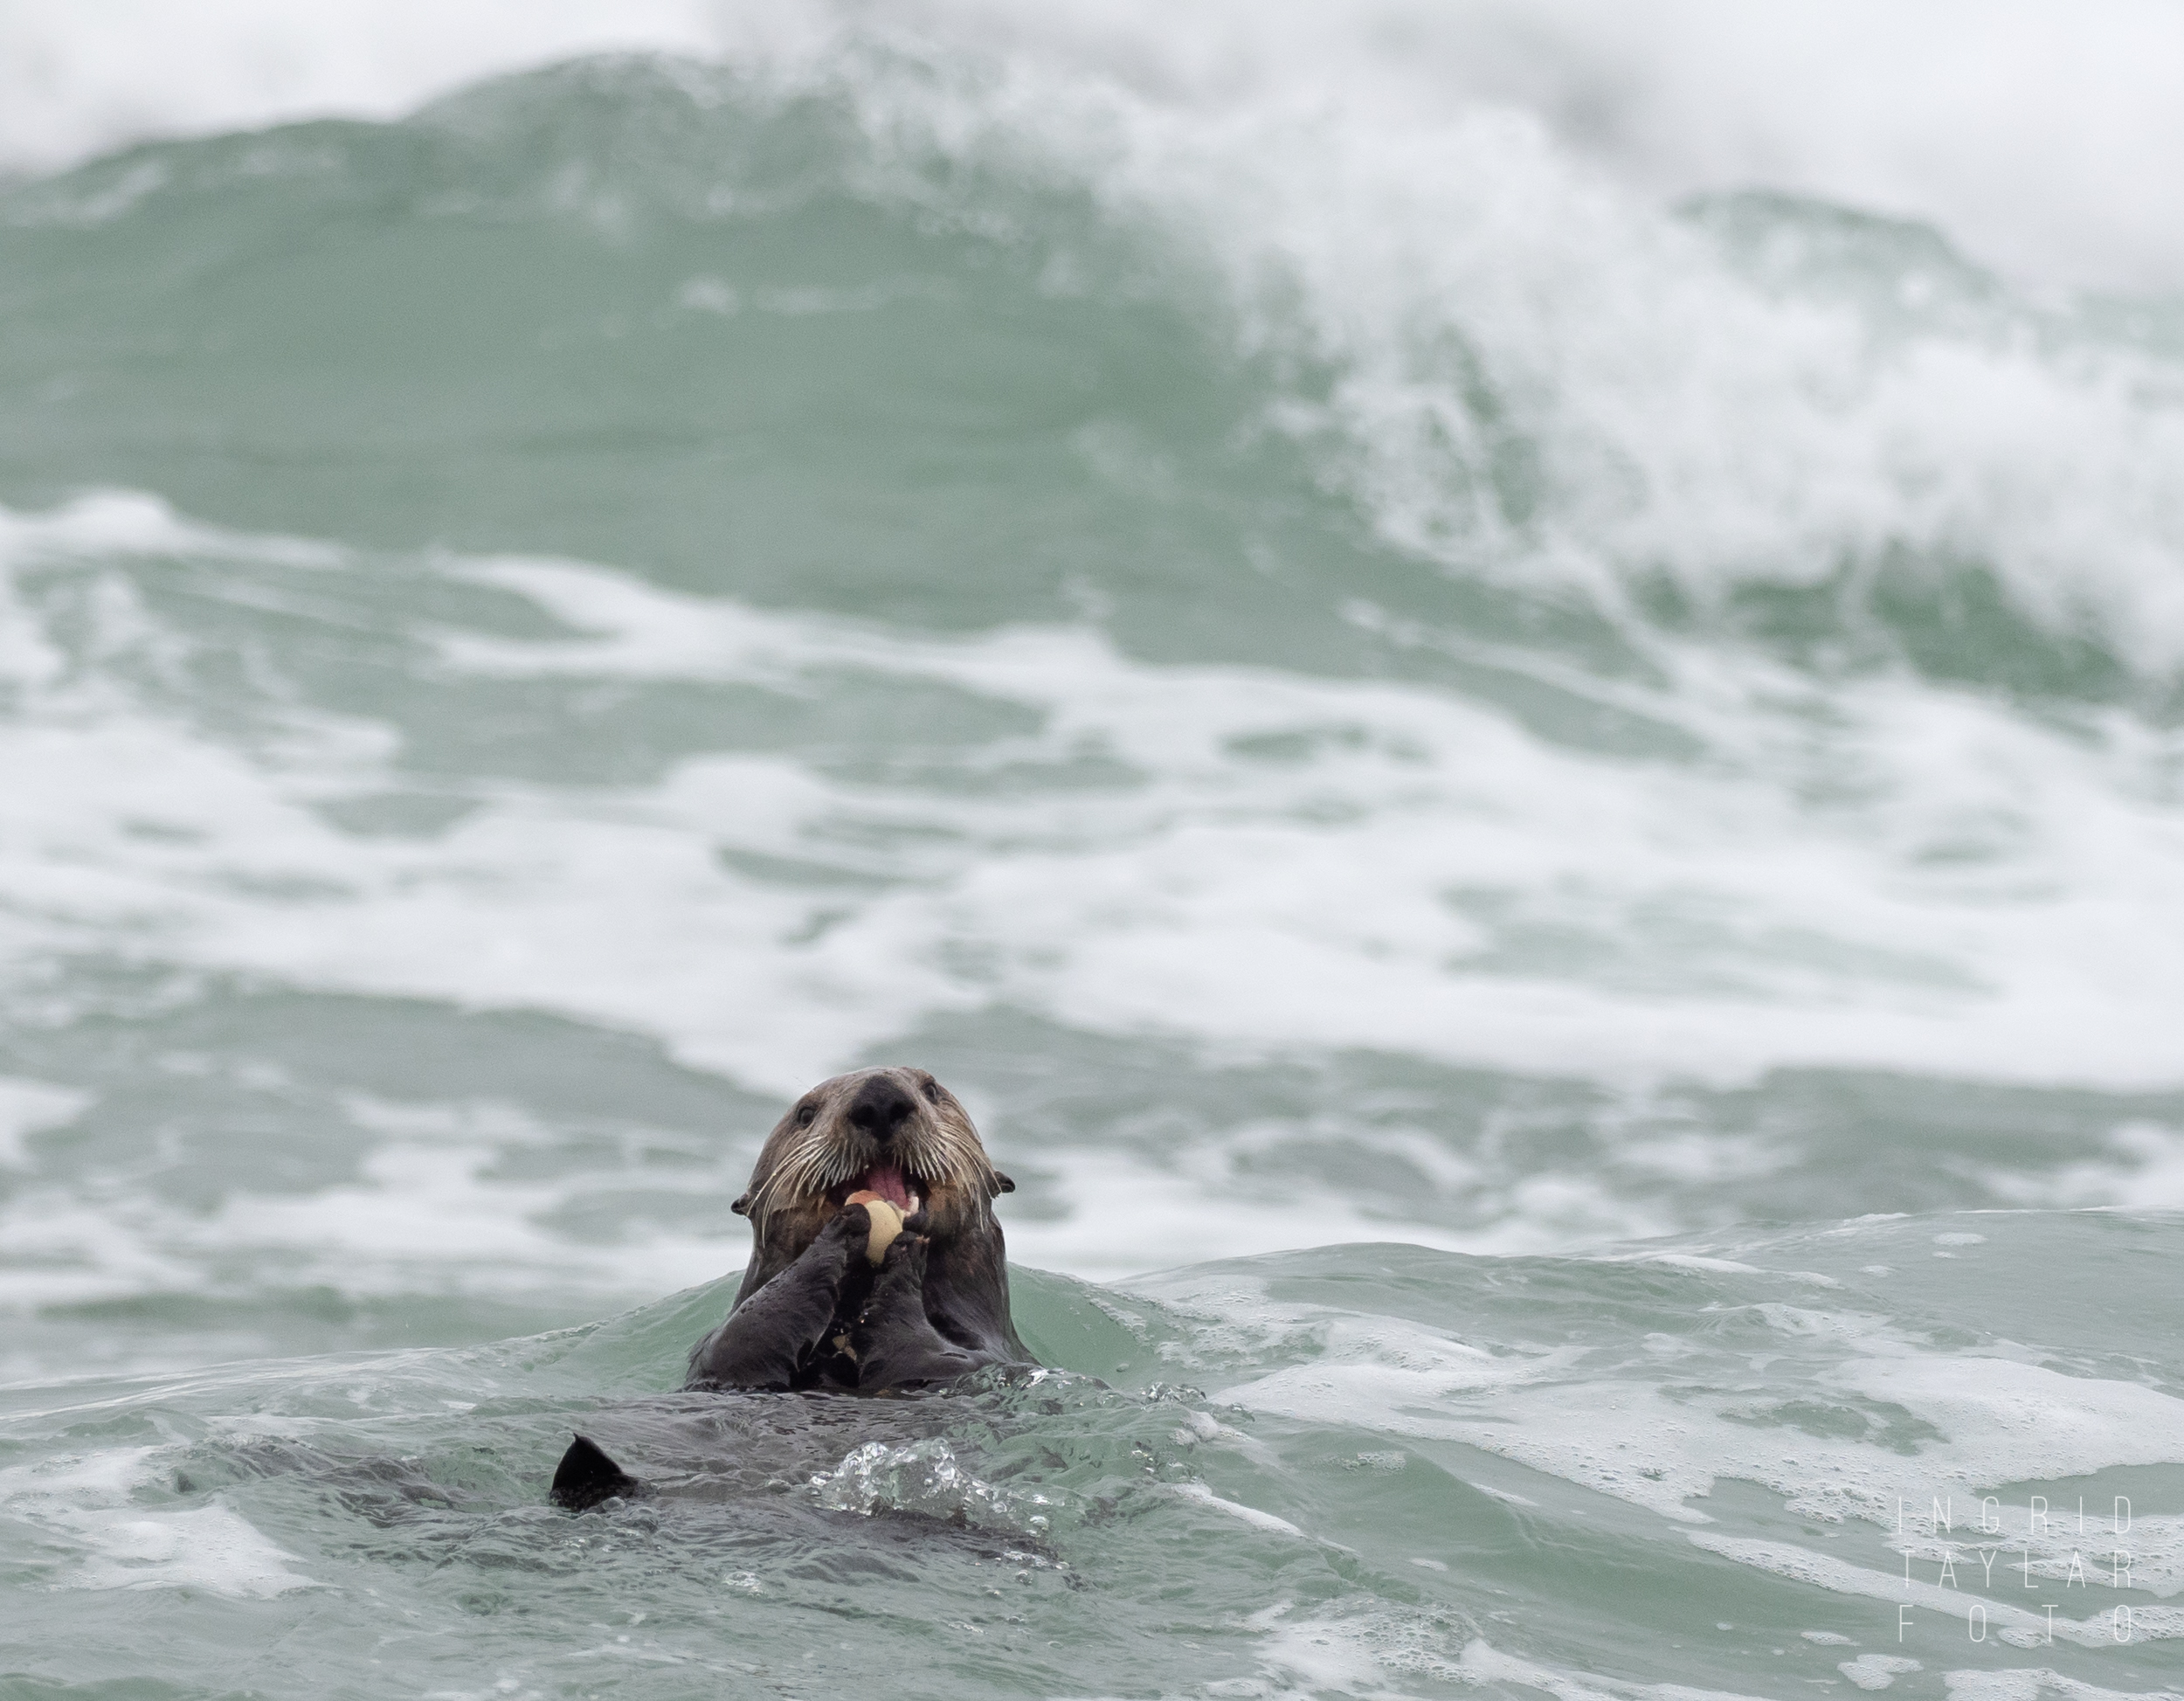 Sea Otter Foraging in Surf